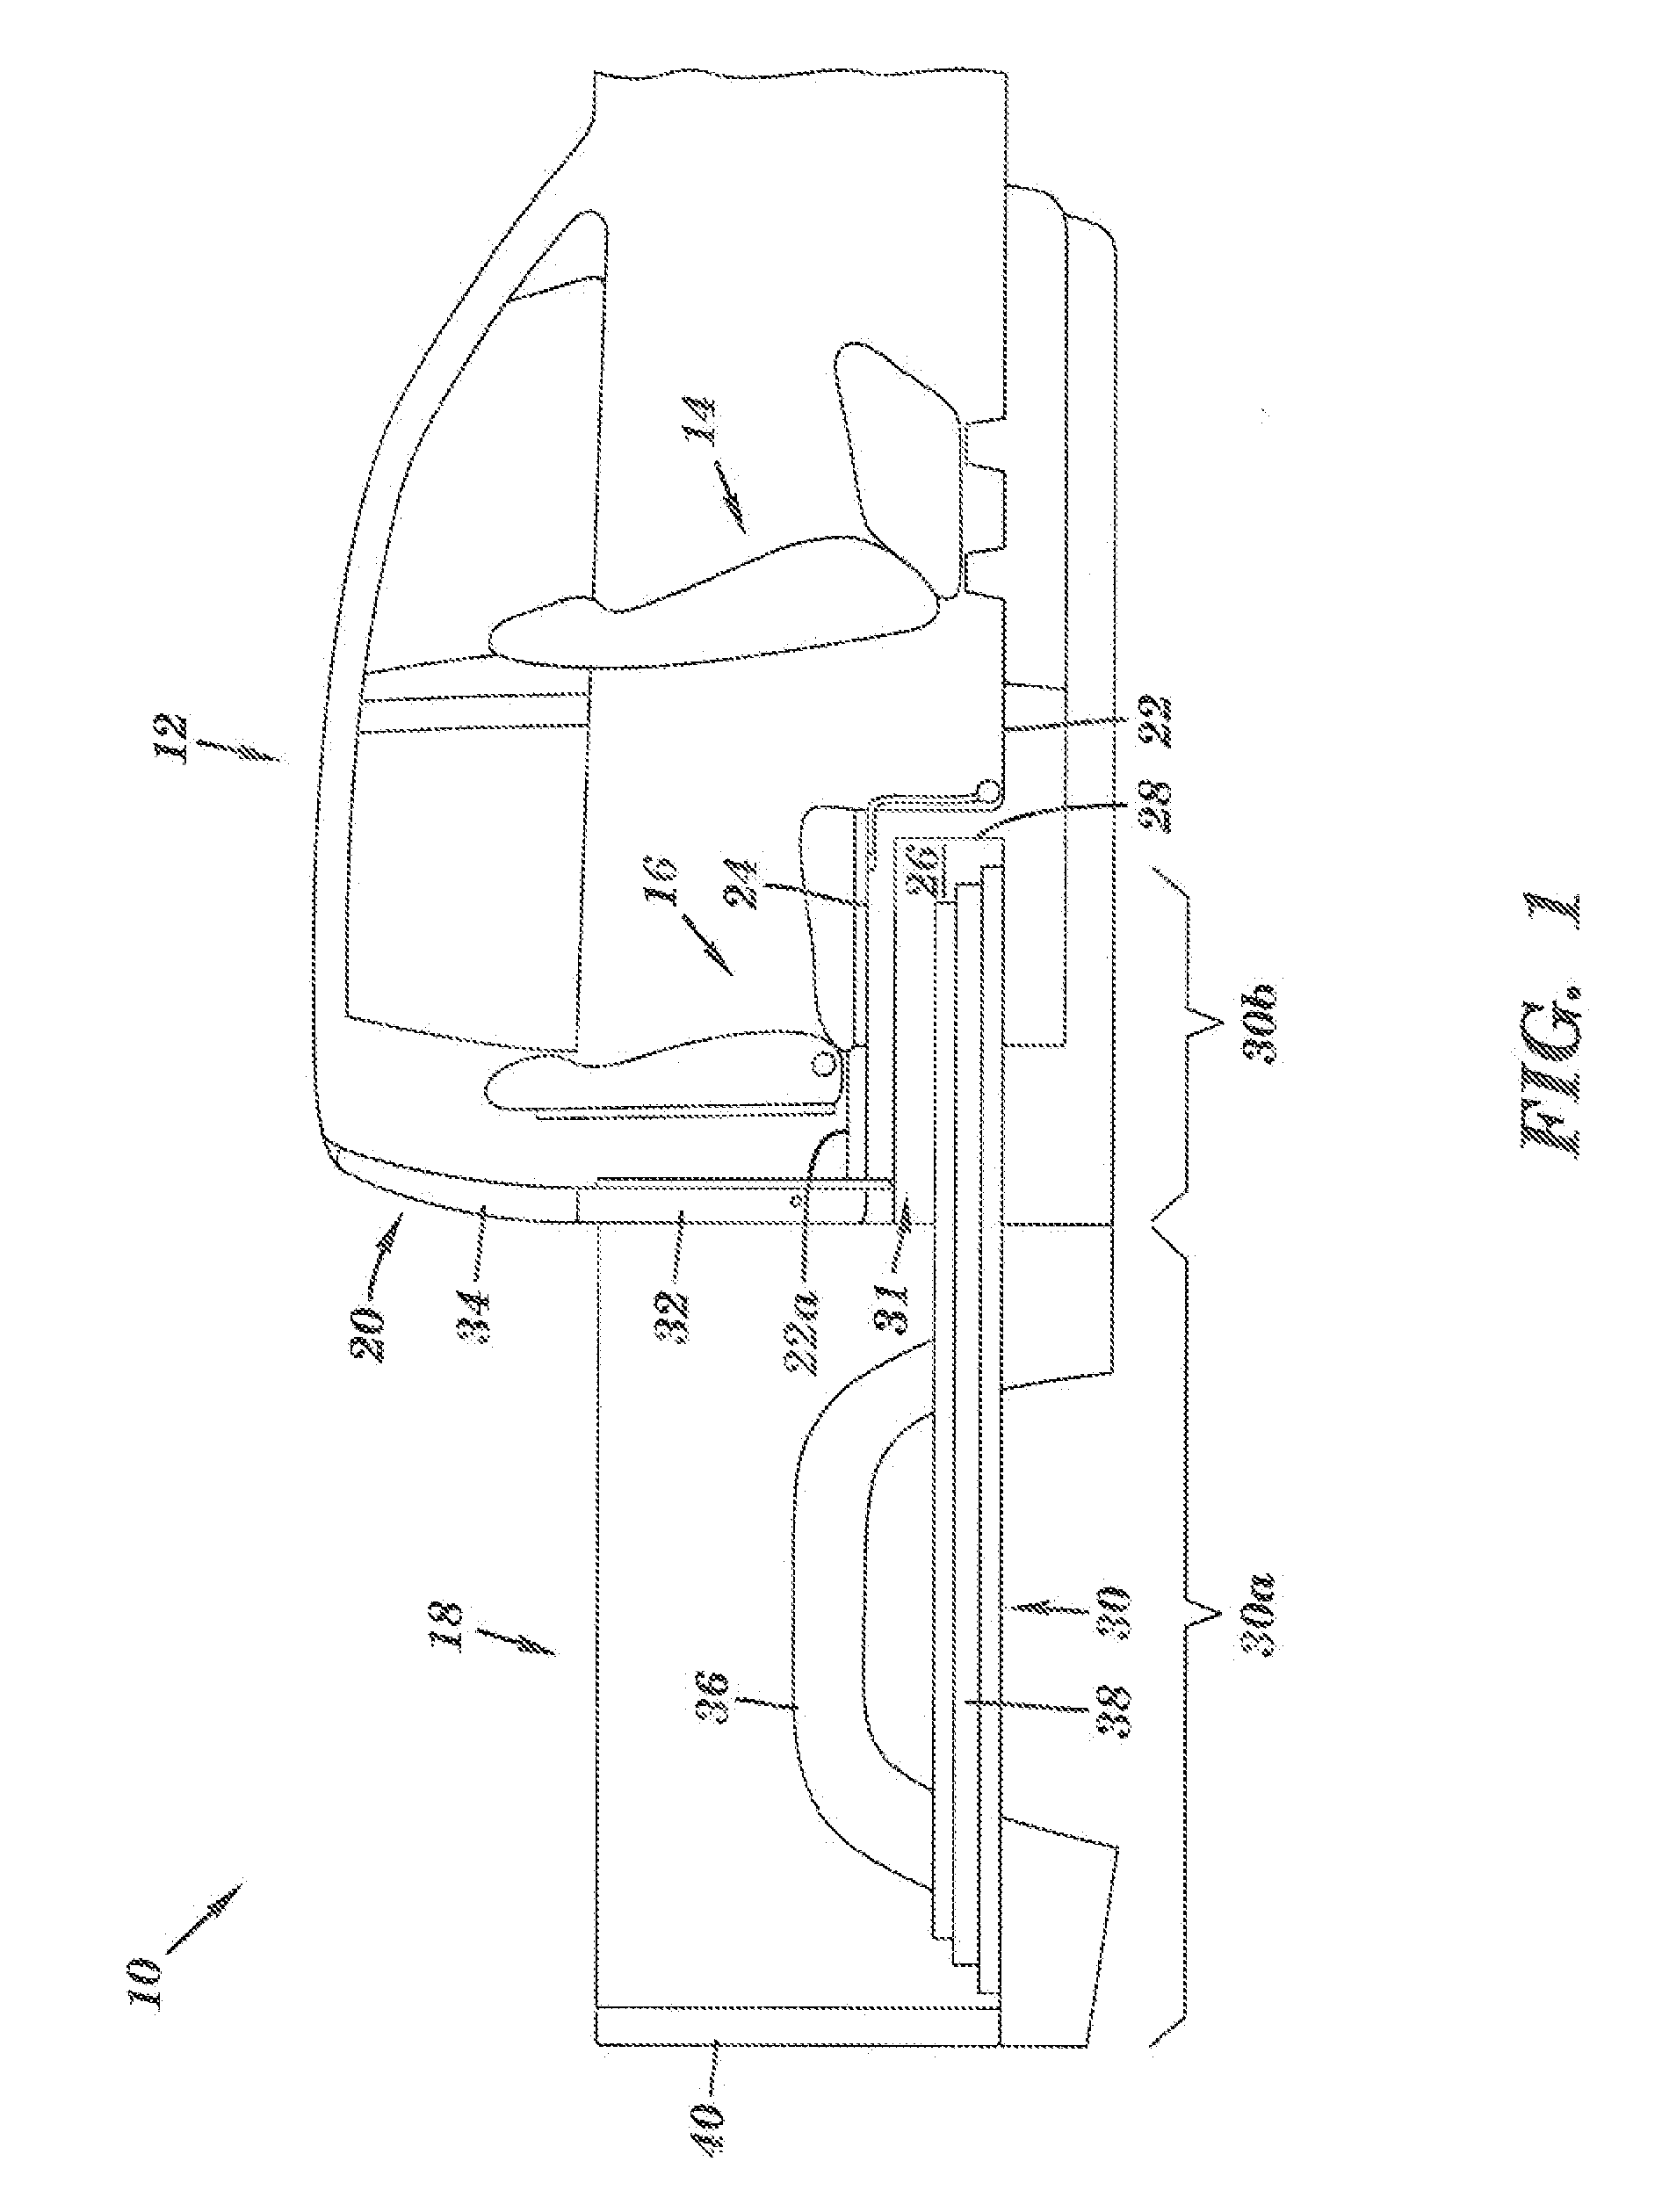 Vehicle body with passenger compartment over cargo bed